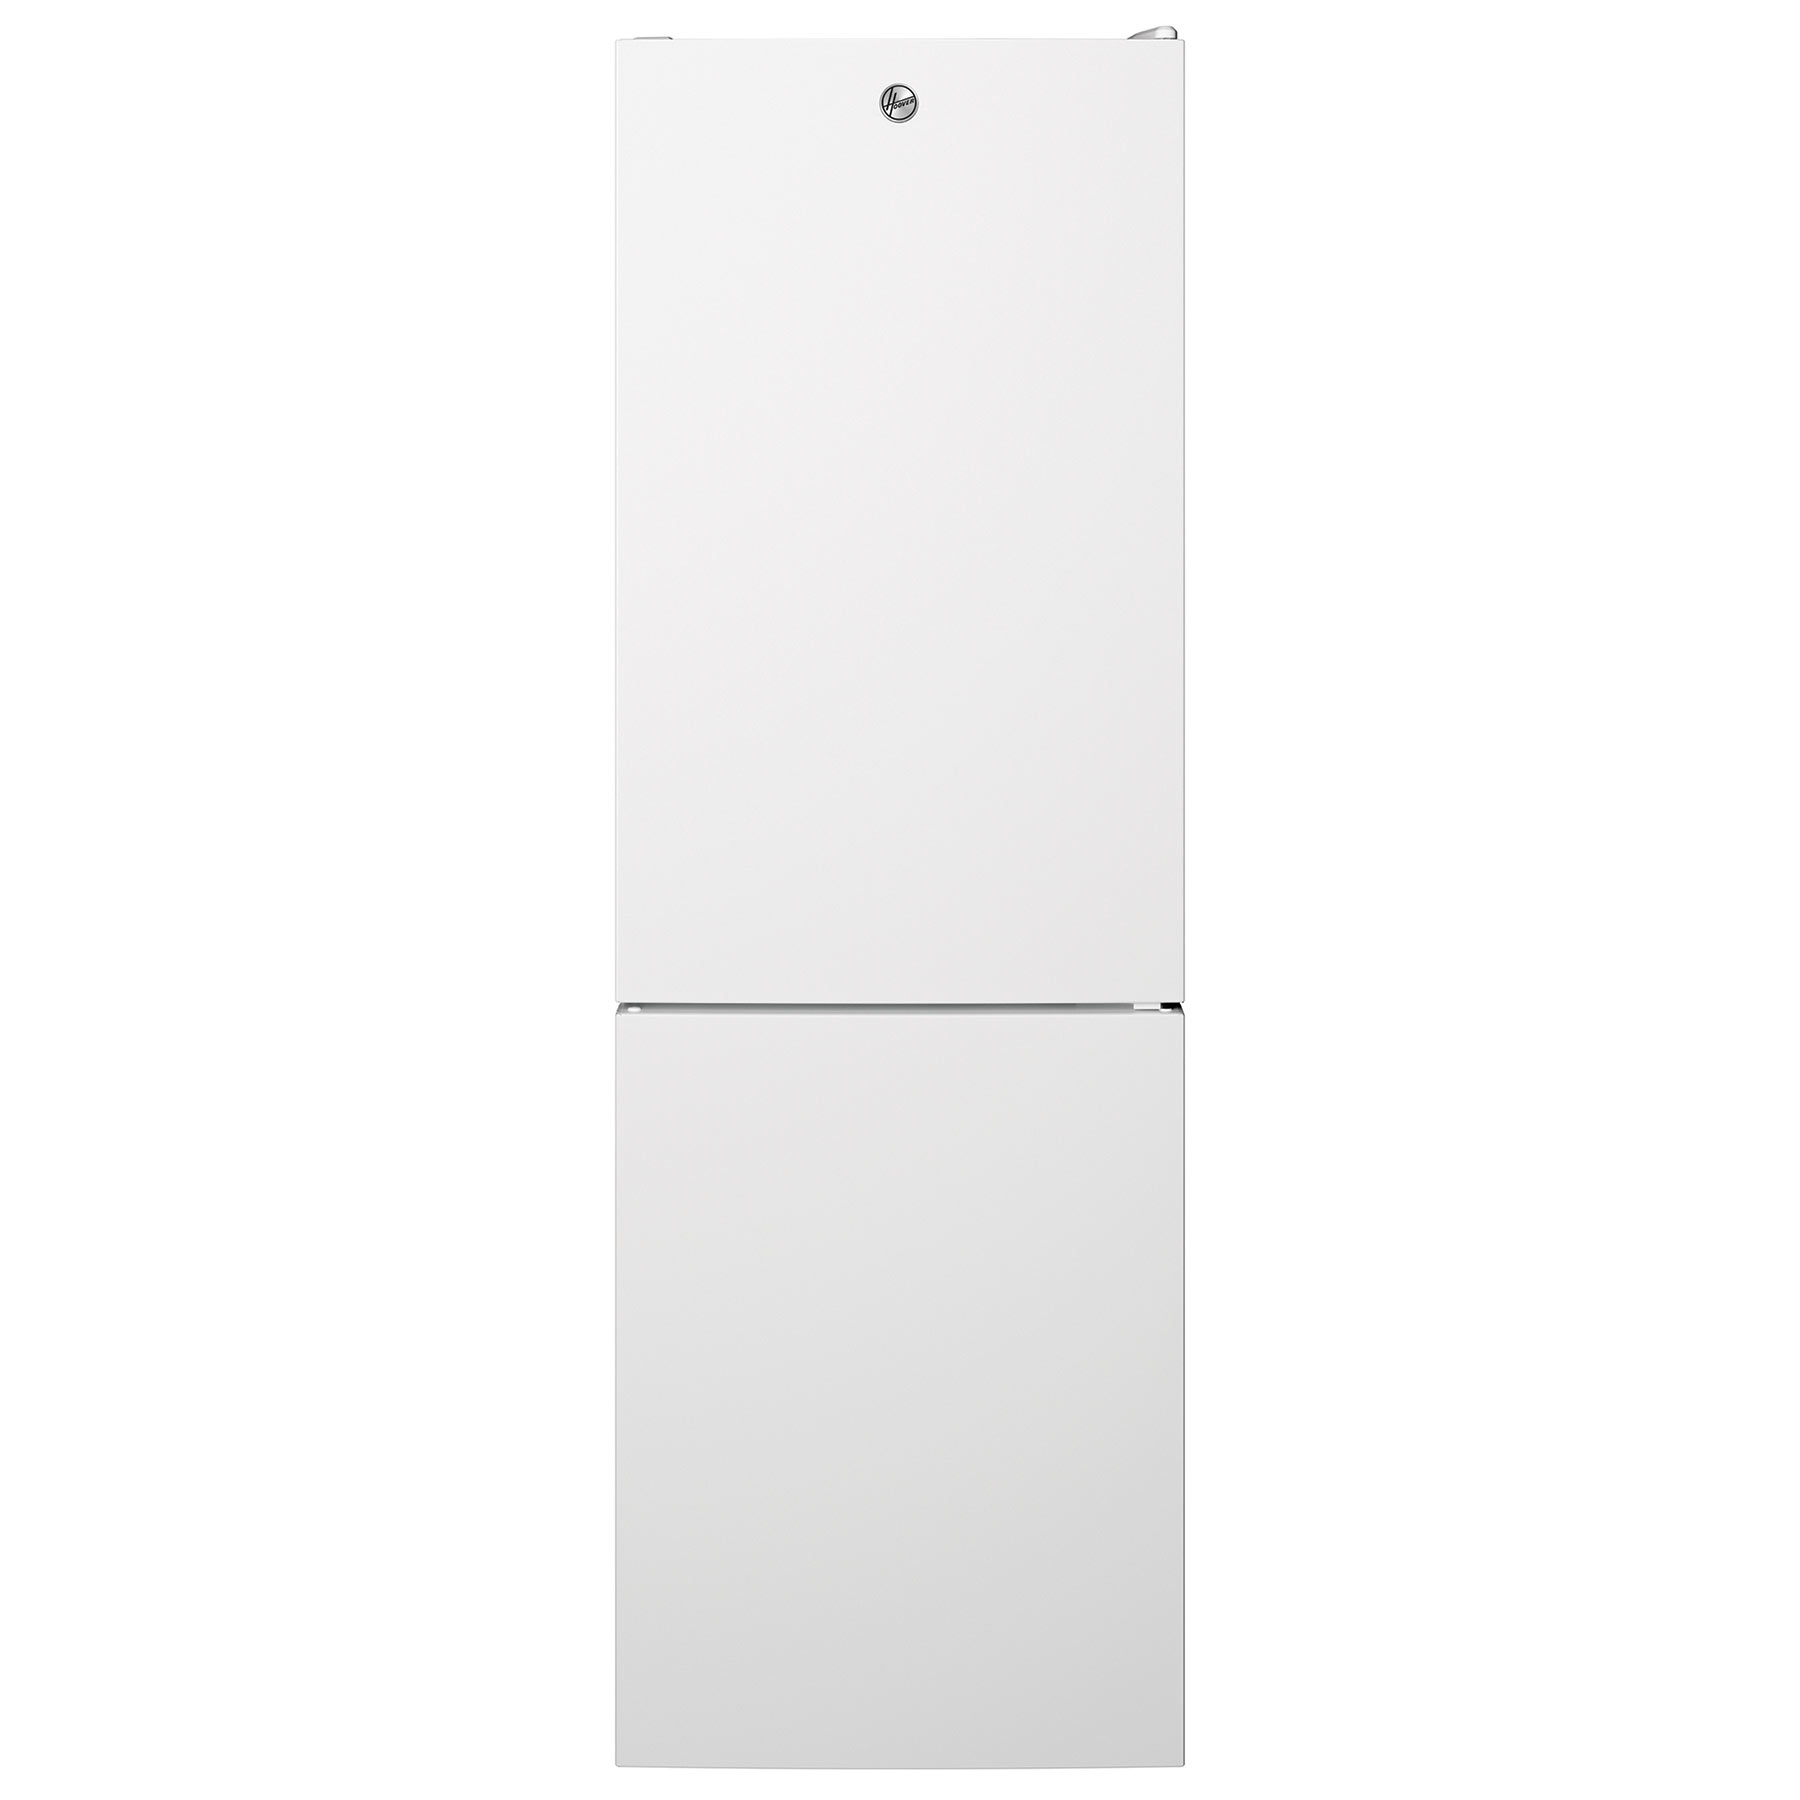 Image of Hoover HOCE3T618FWK 60cm Frost Free Fridge Freezer in White 1 85m F Ra